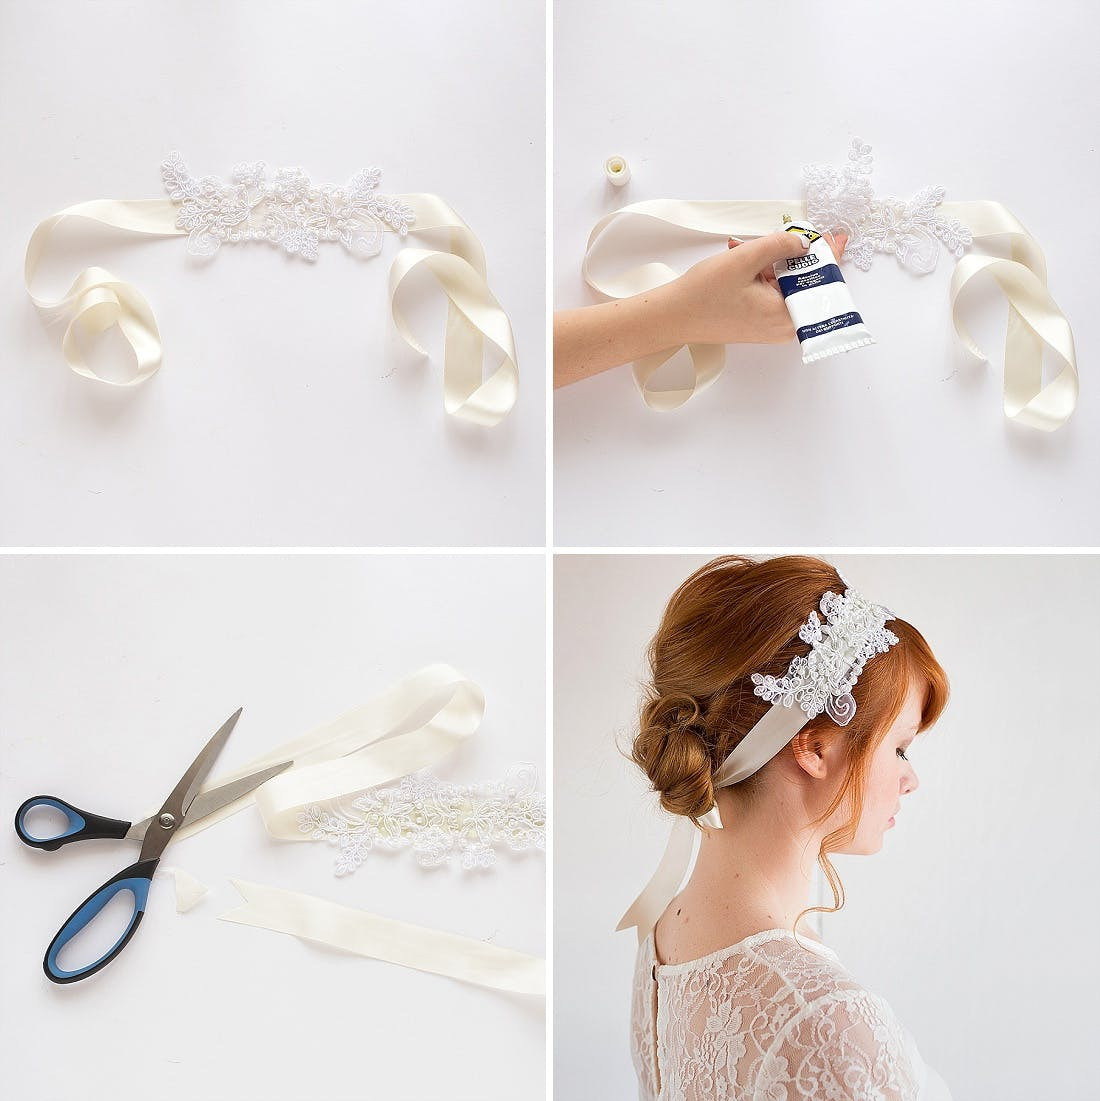 DIY Wedding Headpieces
 How to Make a Gorgeous Wedding Hair Accessory in Less Than